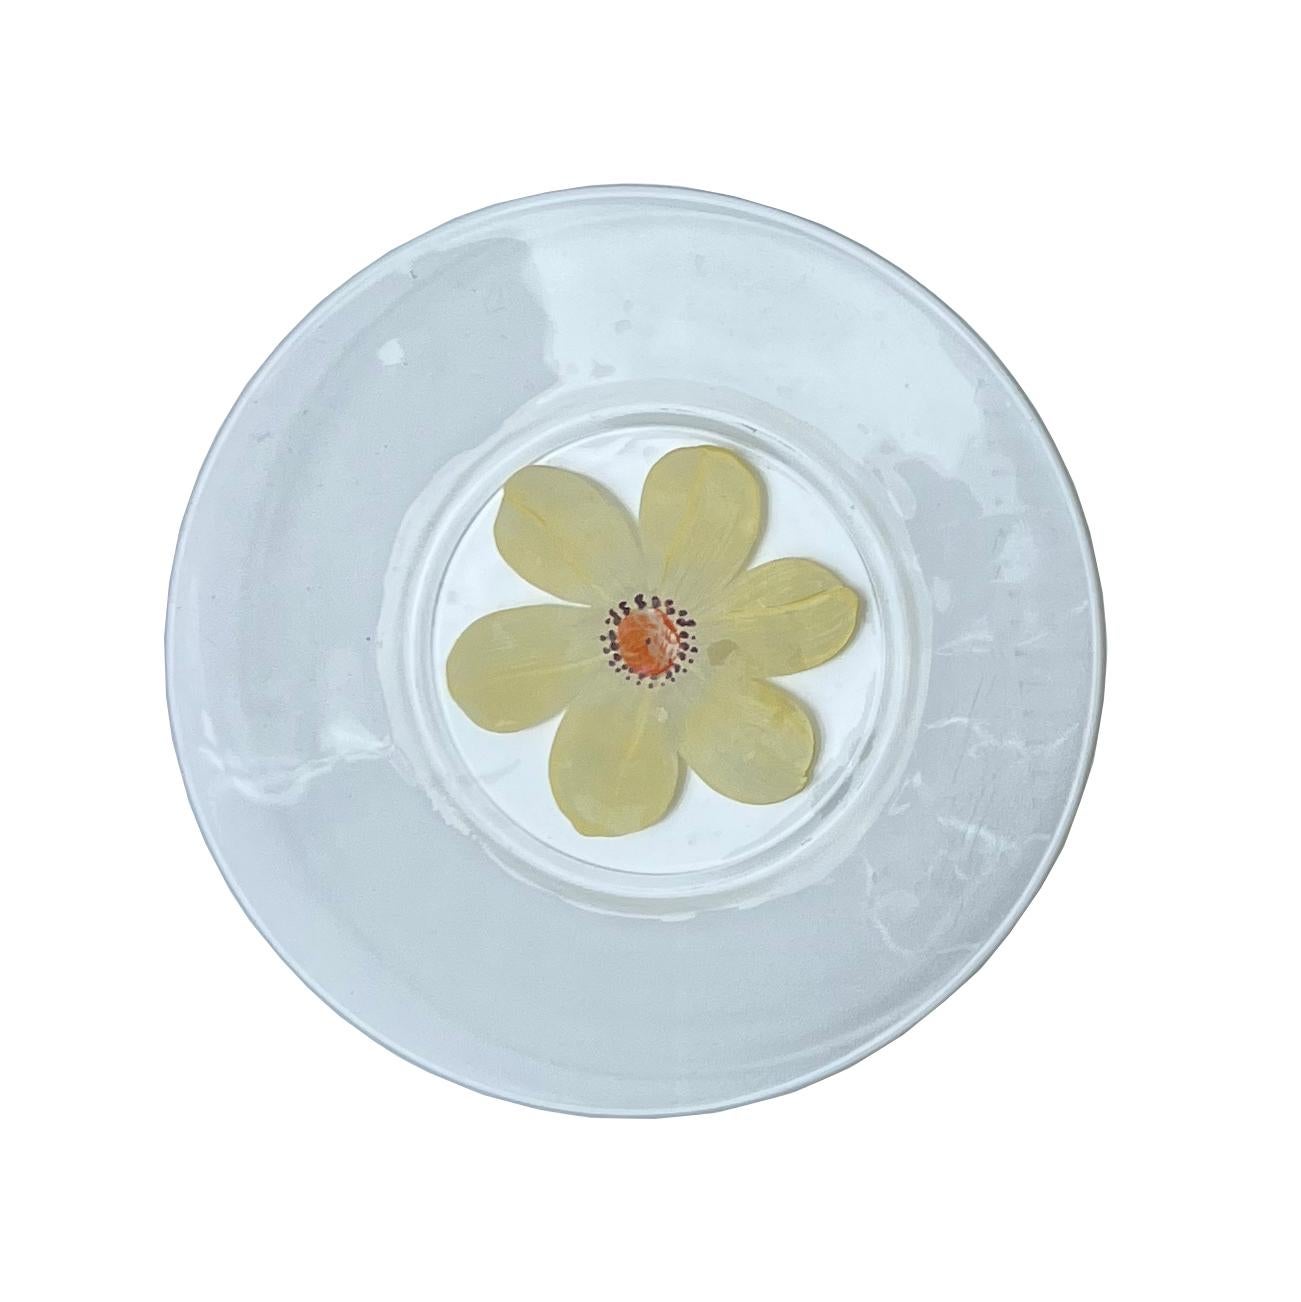 Delight your guests with the whimsical charm of these vintage hand-painted daisy plates. A delicate yellow daisy motif graces each of these small glass plates, adding a playful, enchanting touch to your table décor.

This set of four plates